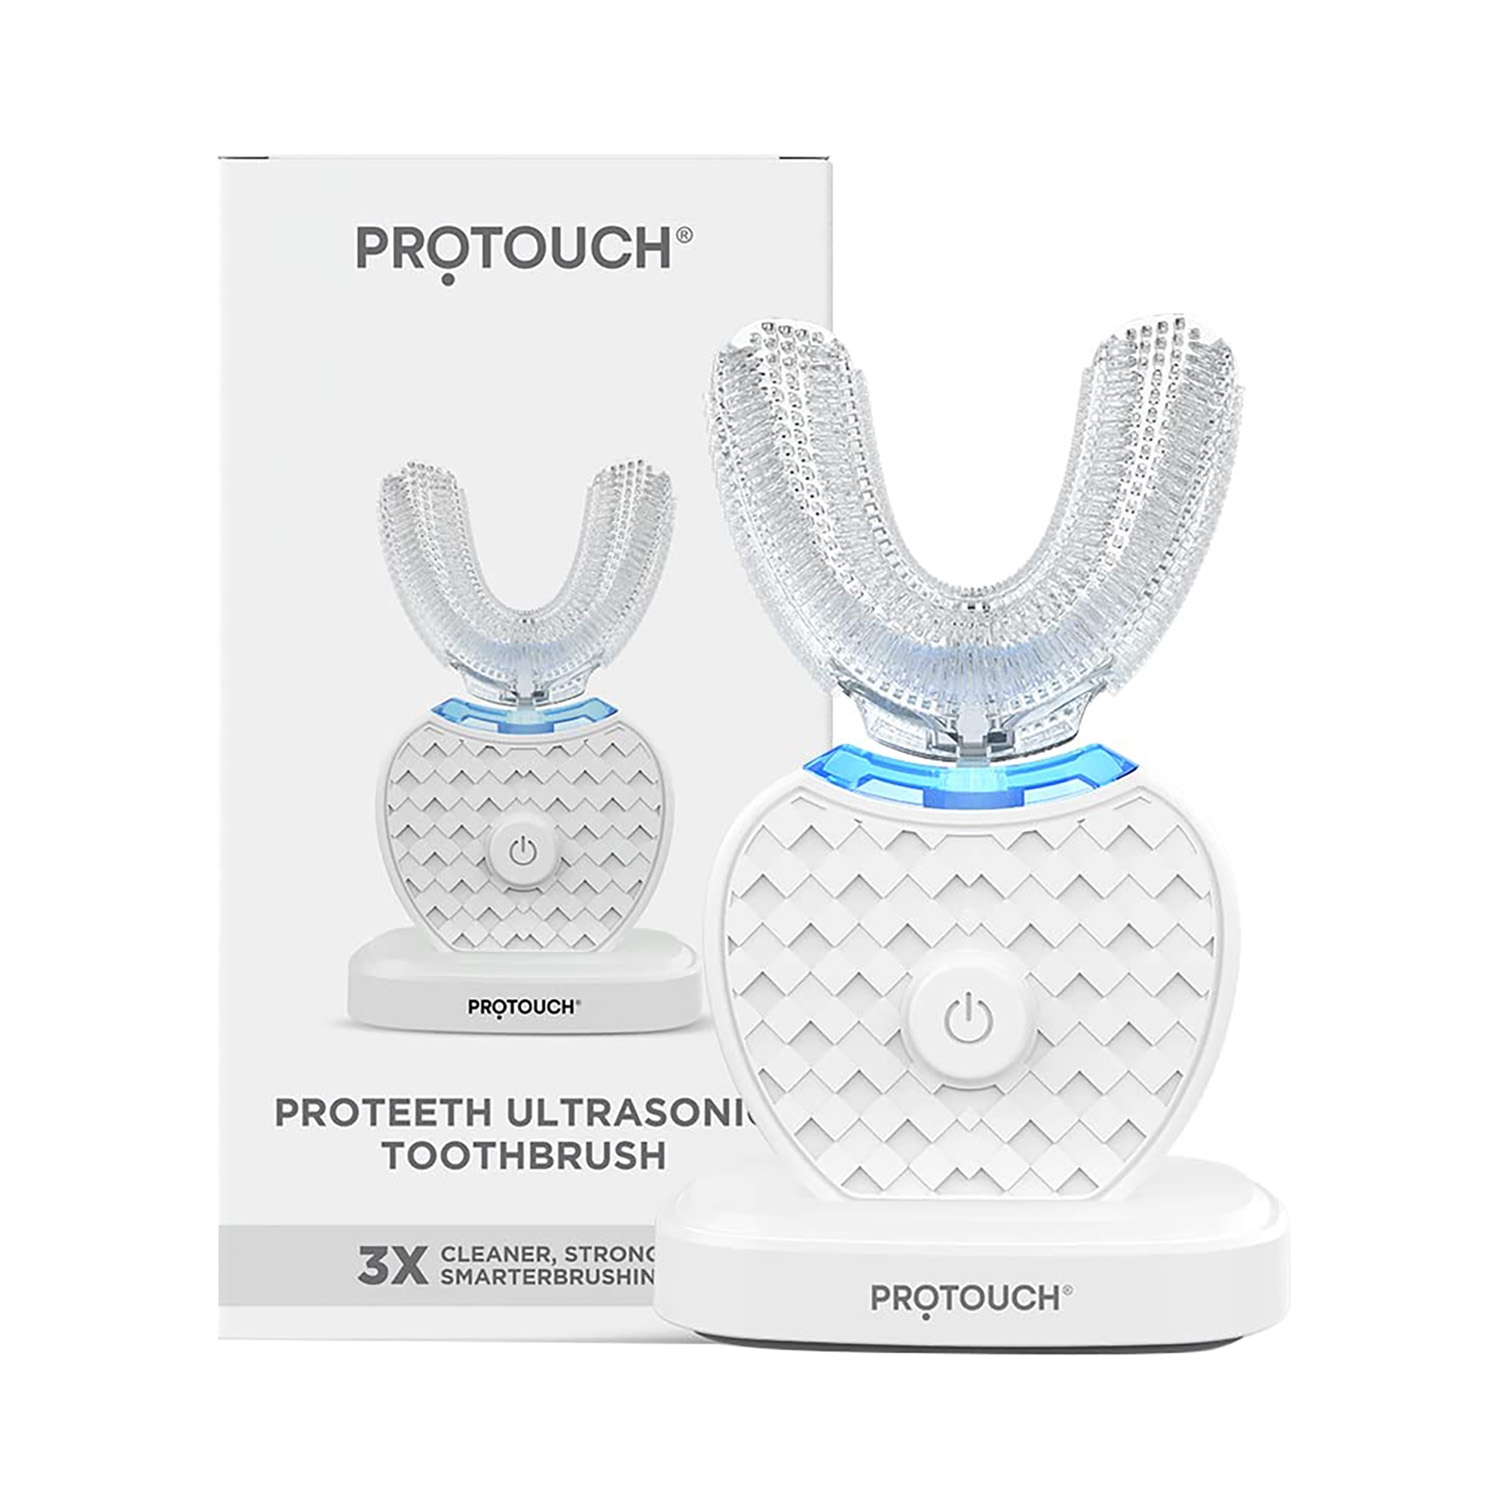 Protouch | Protouch LED Teeth Whitening Gum Massager for Stronger Gum and Whiter Teeth